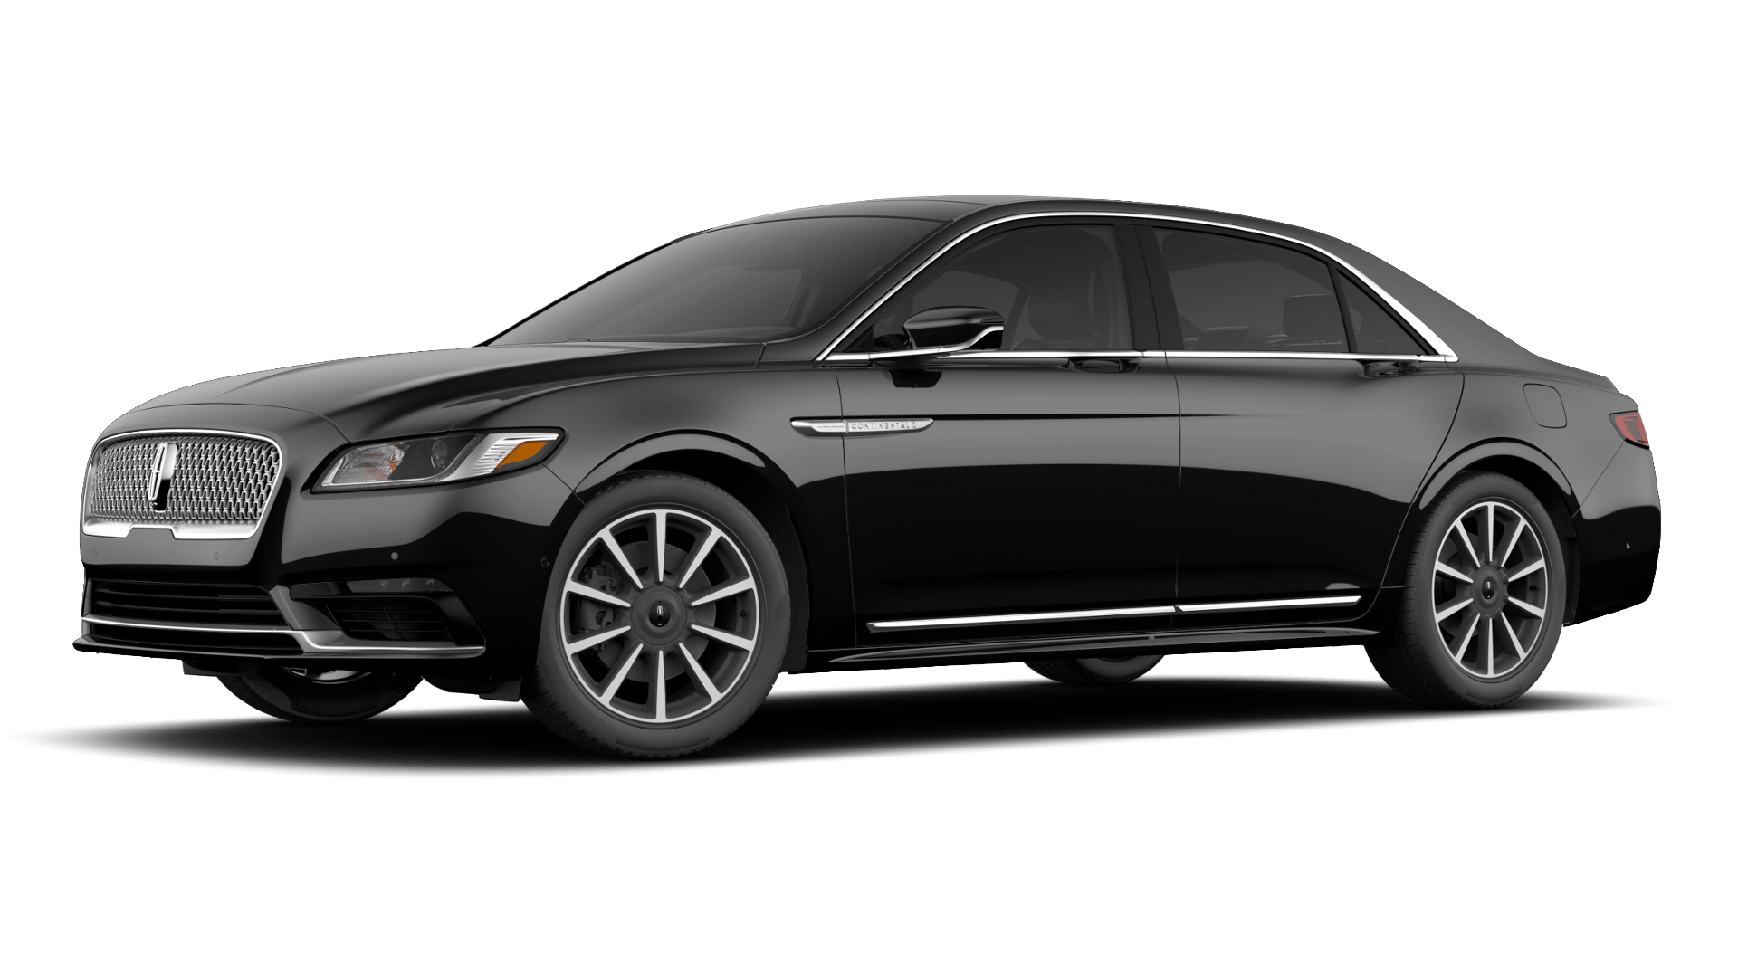 Lincoln Continental Reserve 2020